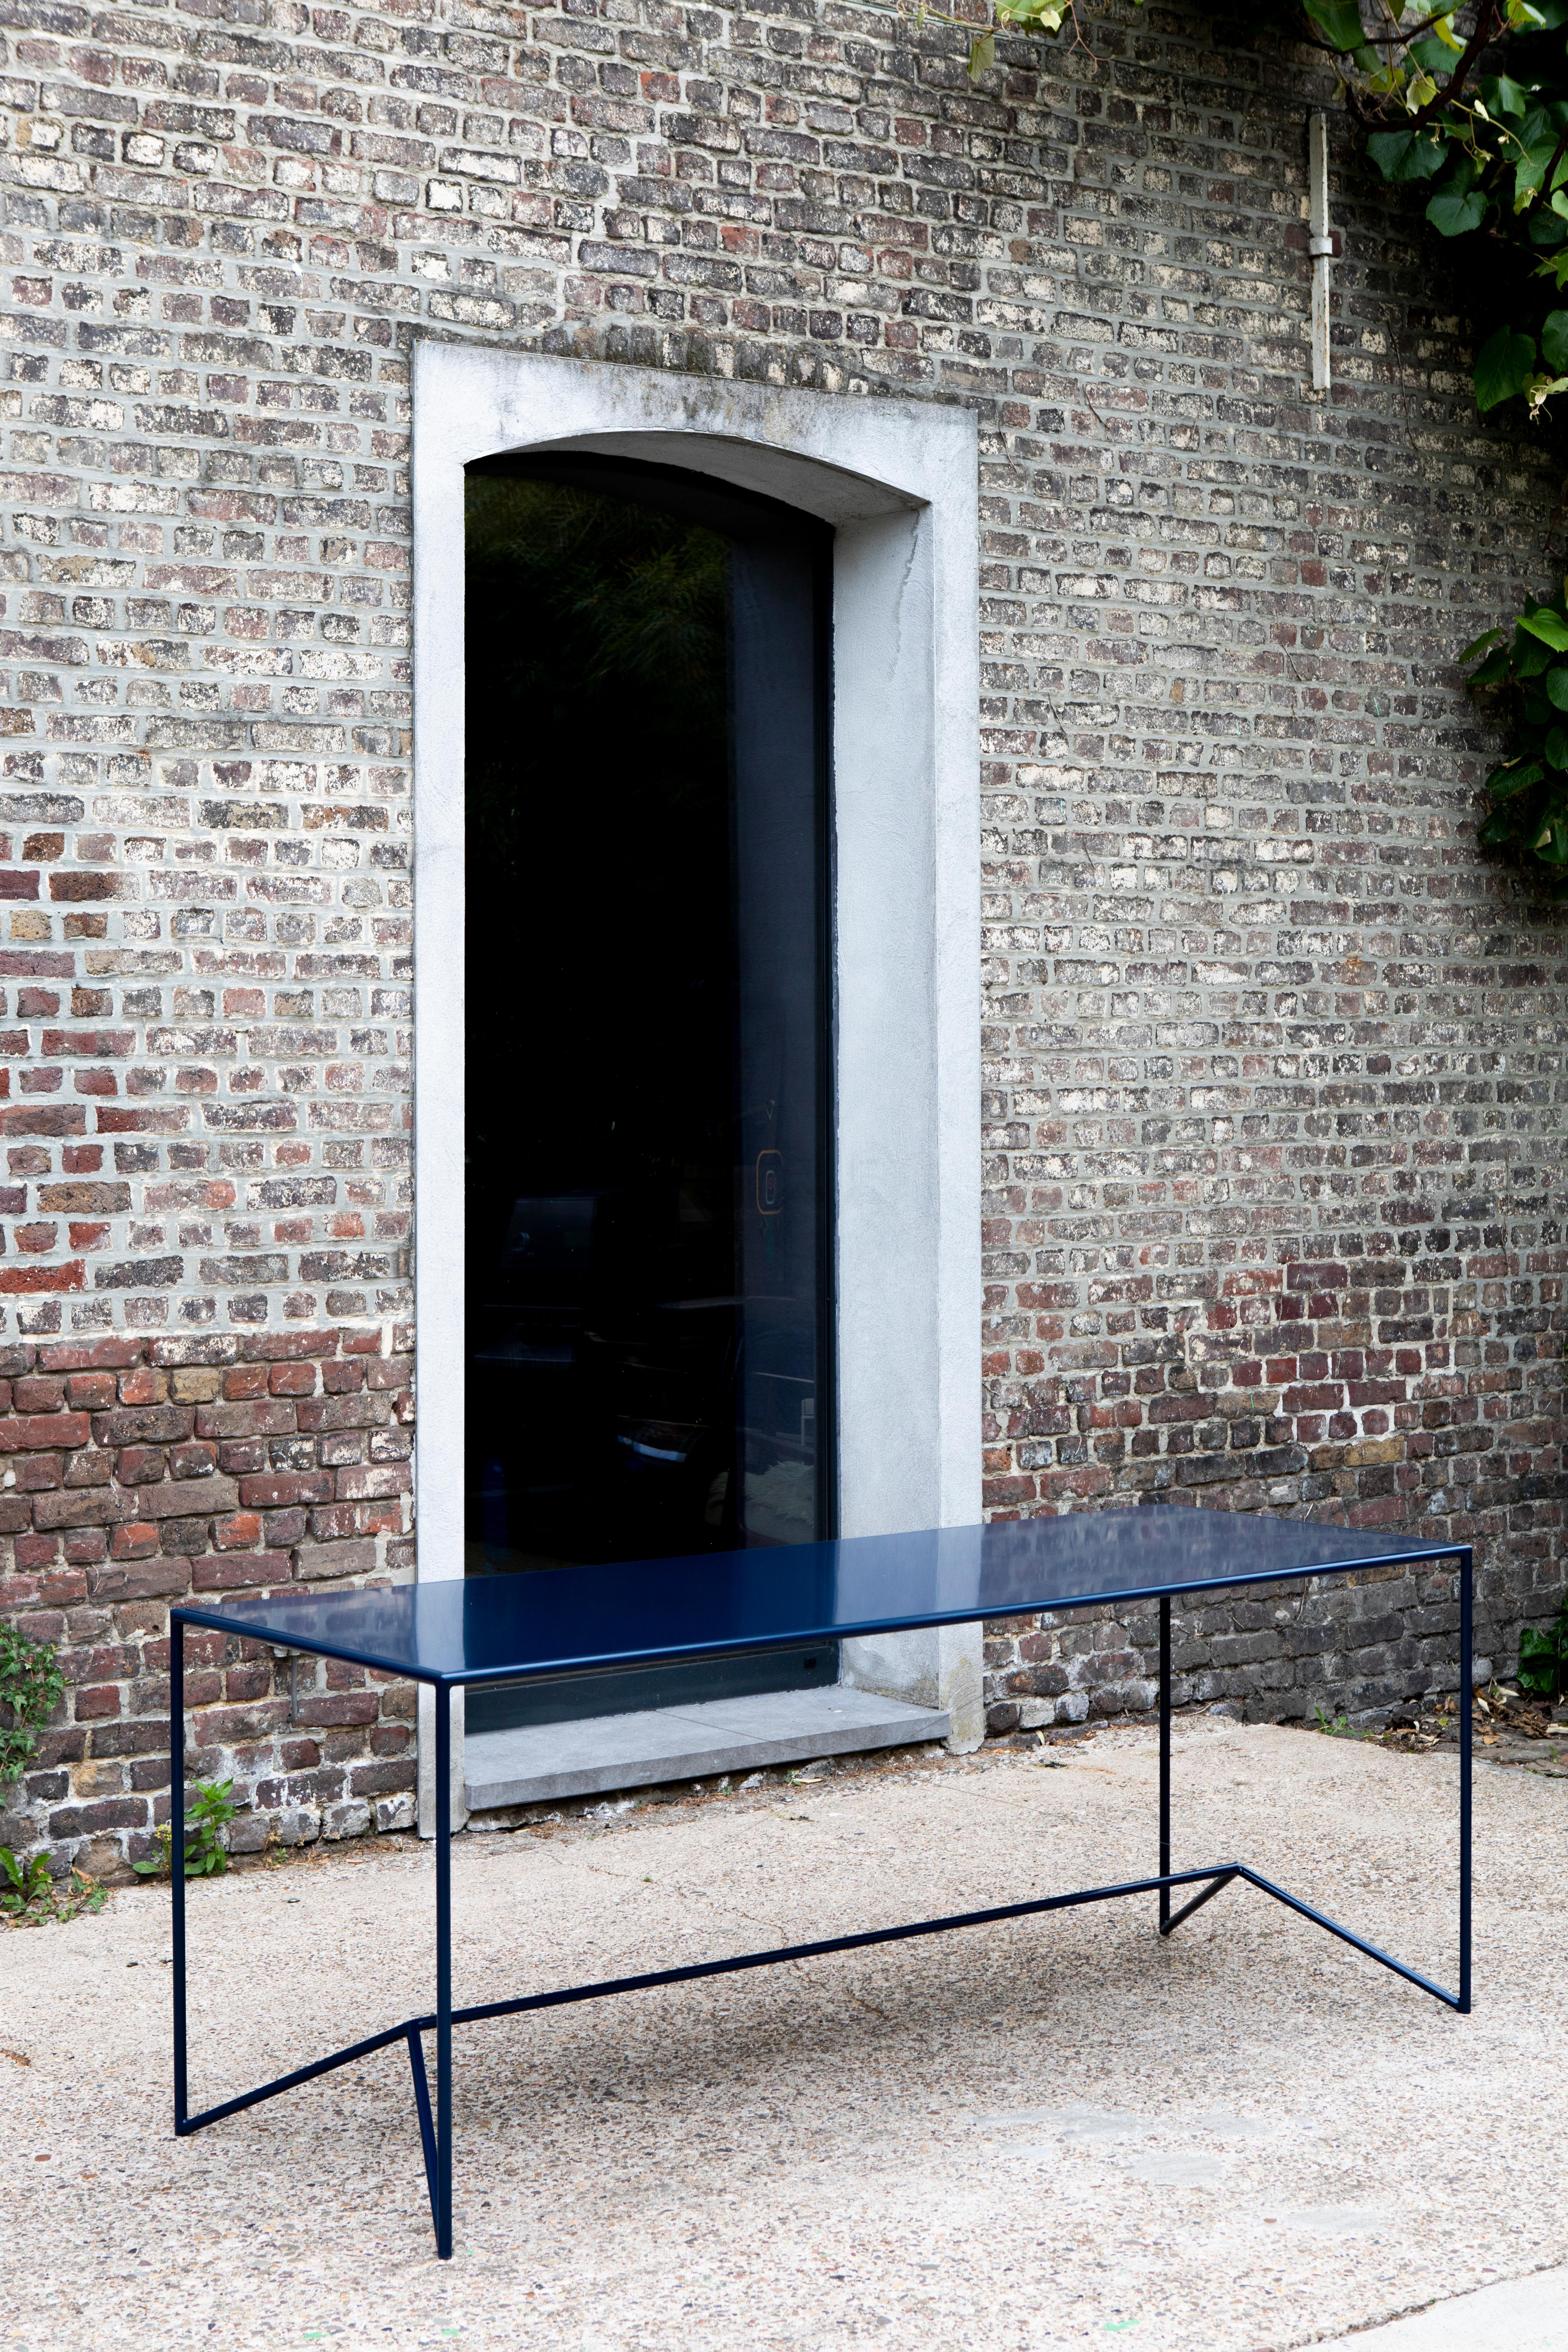 Campi Di Colore Blue Table by Maria Scarpulla
Dimensions: D240 x W80 x H75 cm
Materials: Lacquered steel with a special coating for outdoor use.
Available in different colours: Color combination: red, yellow, blue, white.

A collection of